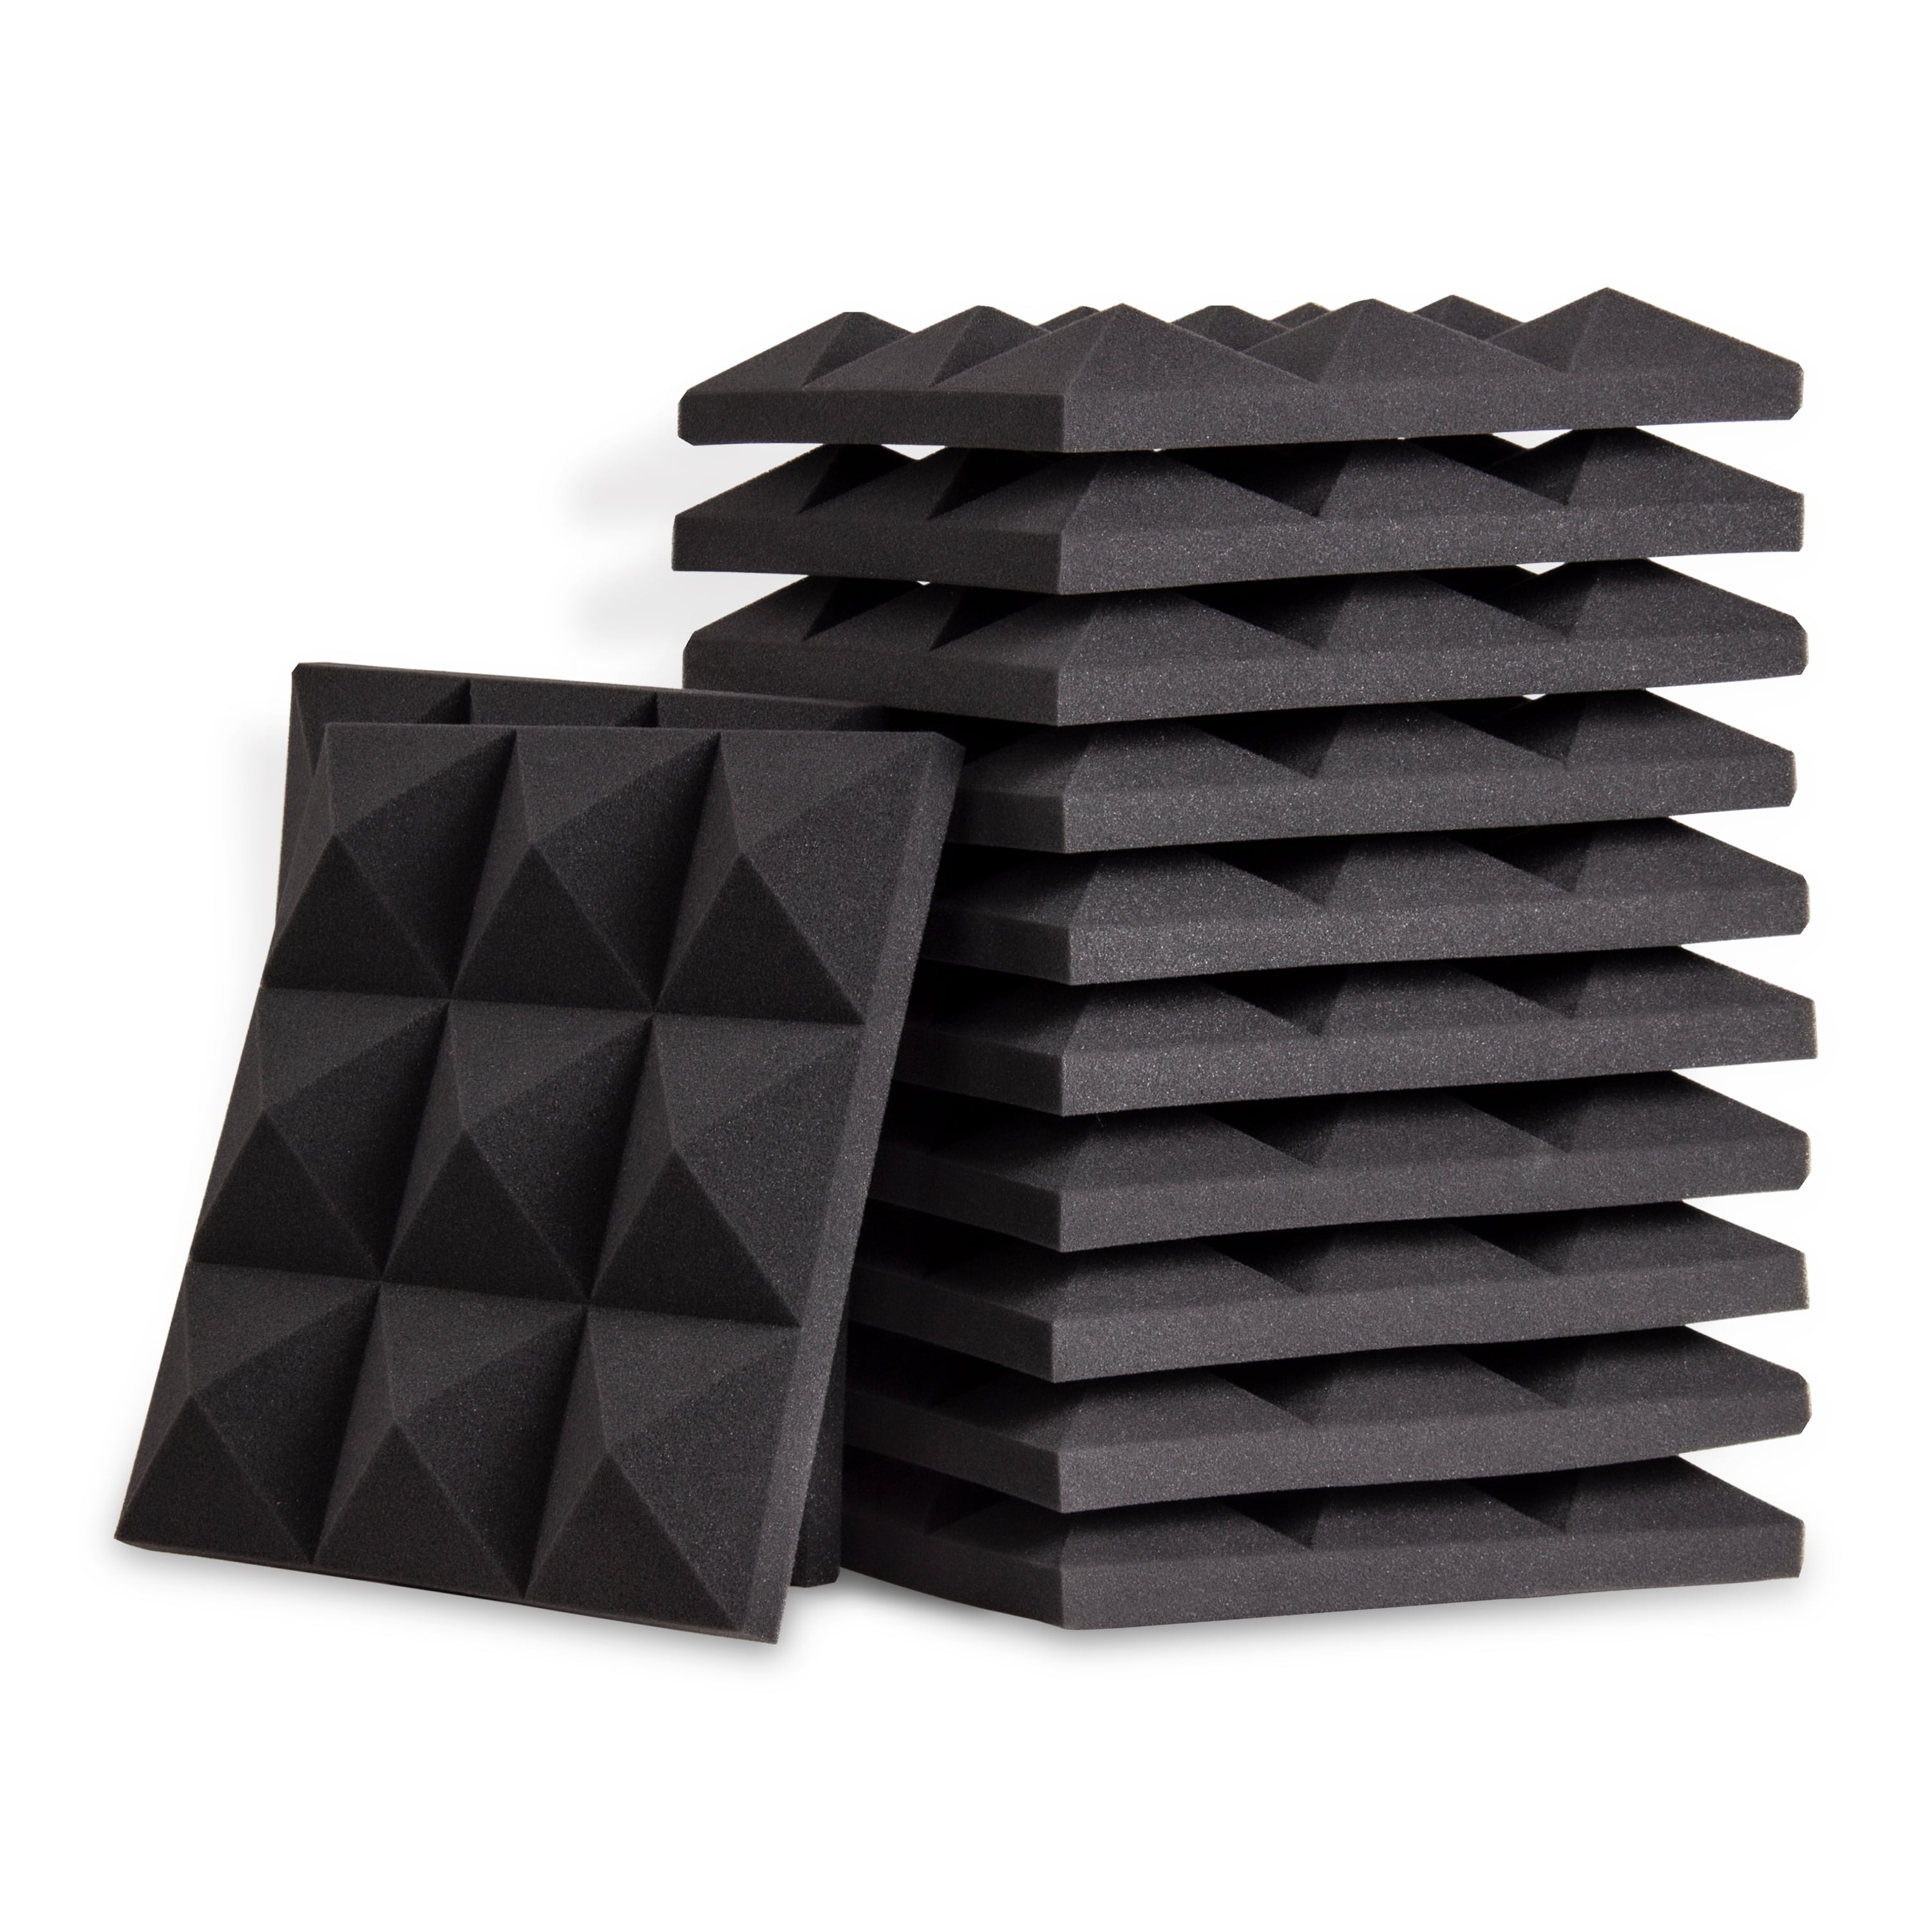  ZELMINE Upgrade 24 pack Self-adhesive Sound Proof Foam  Panels,12 X 12 X 2 Acoustic Panels with High Density,Decorative  Soundproof Wall Panels Studio Sound Absorbing Foam for Wall and  Ceiling(Black） : Musical